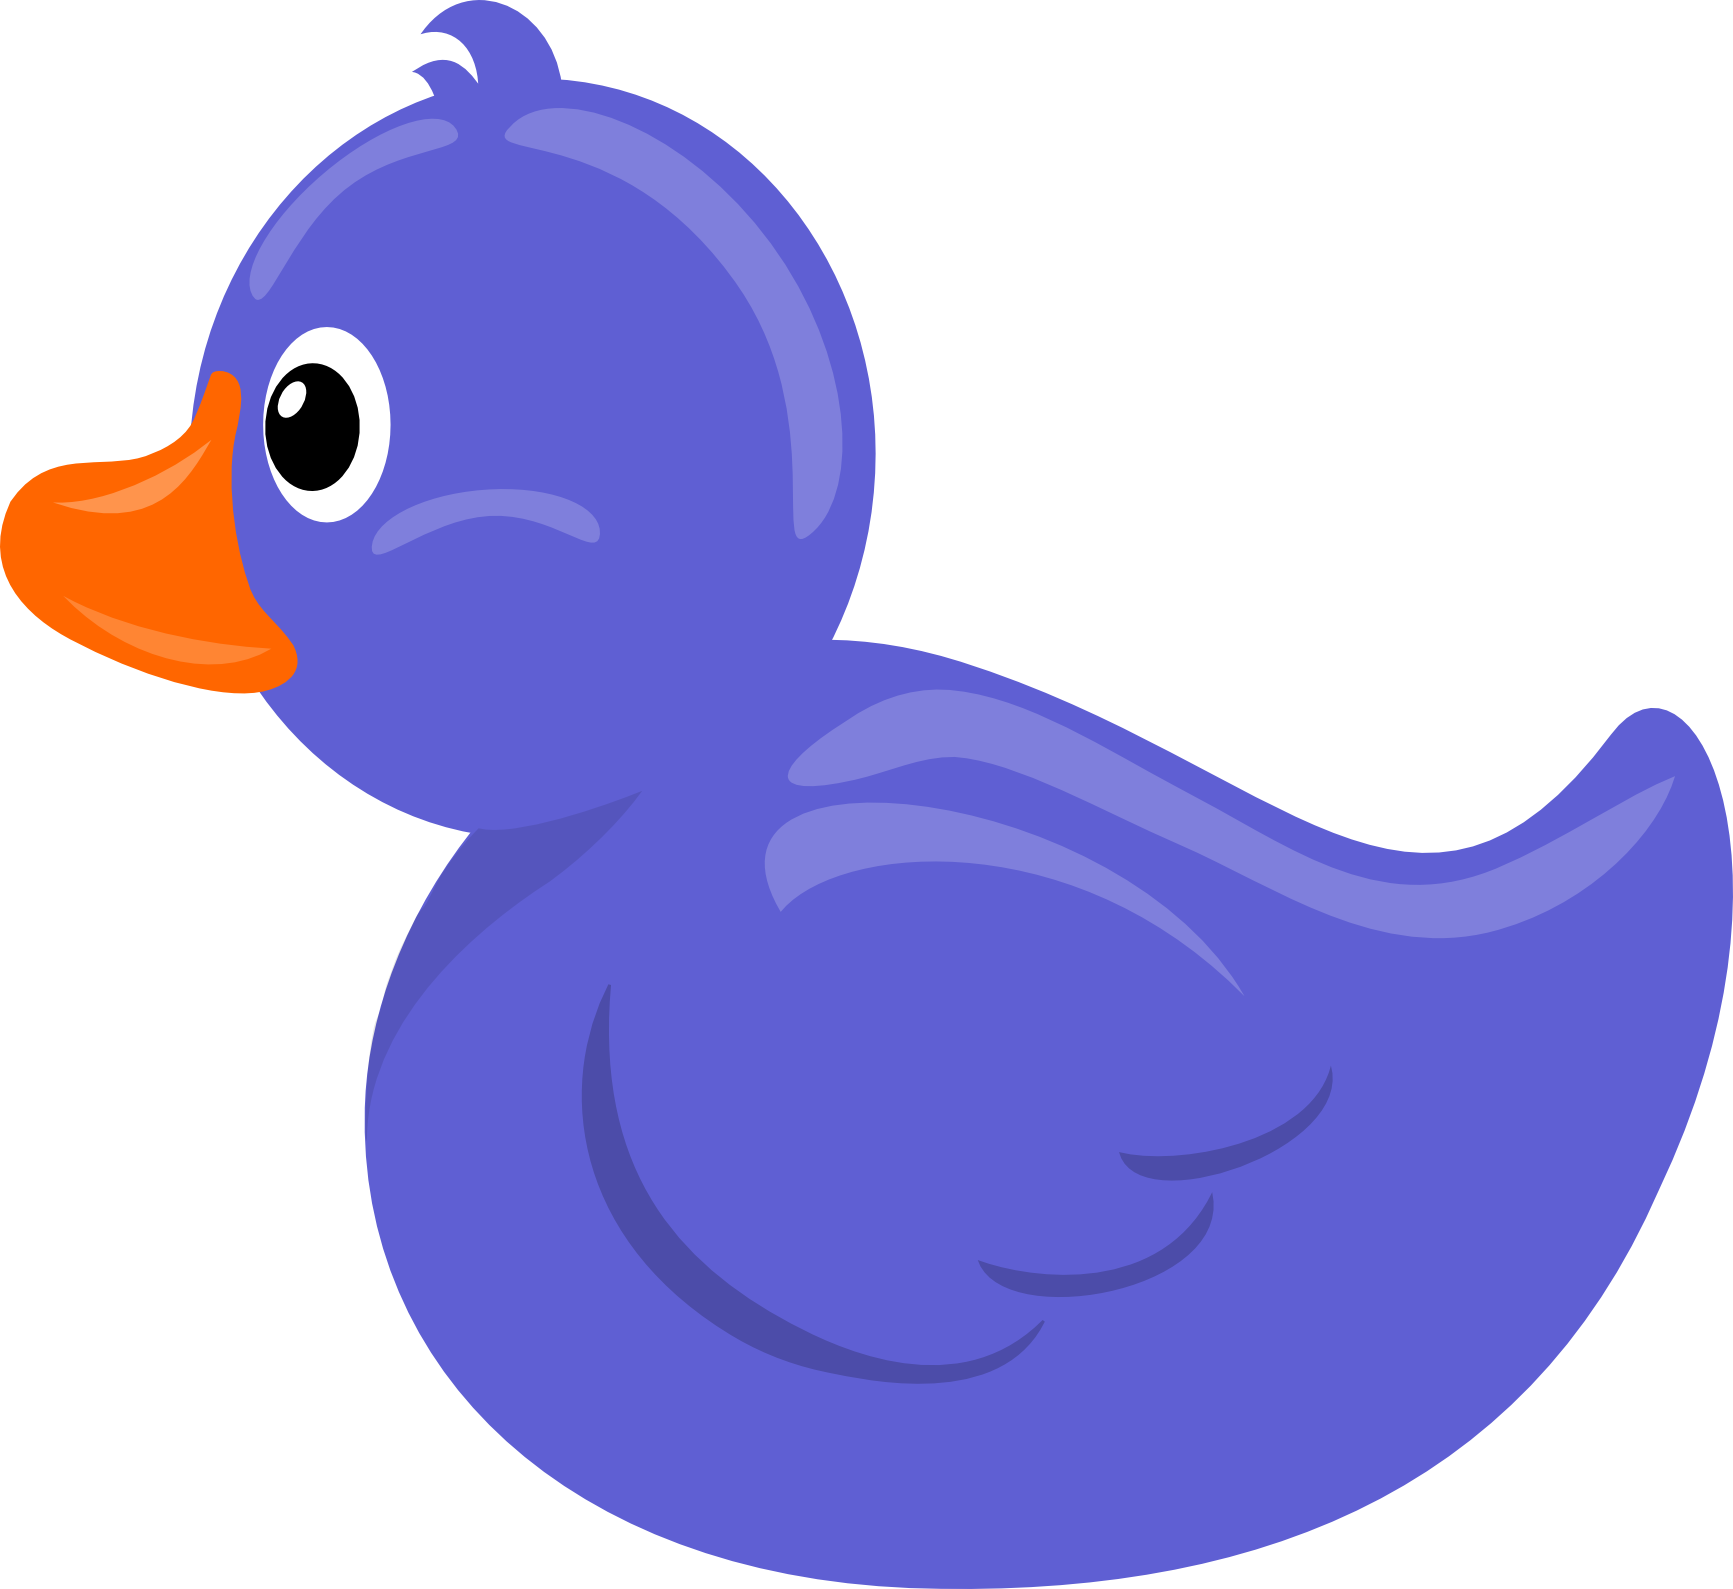 Flying duck free images. Ducks clipart blue